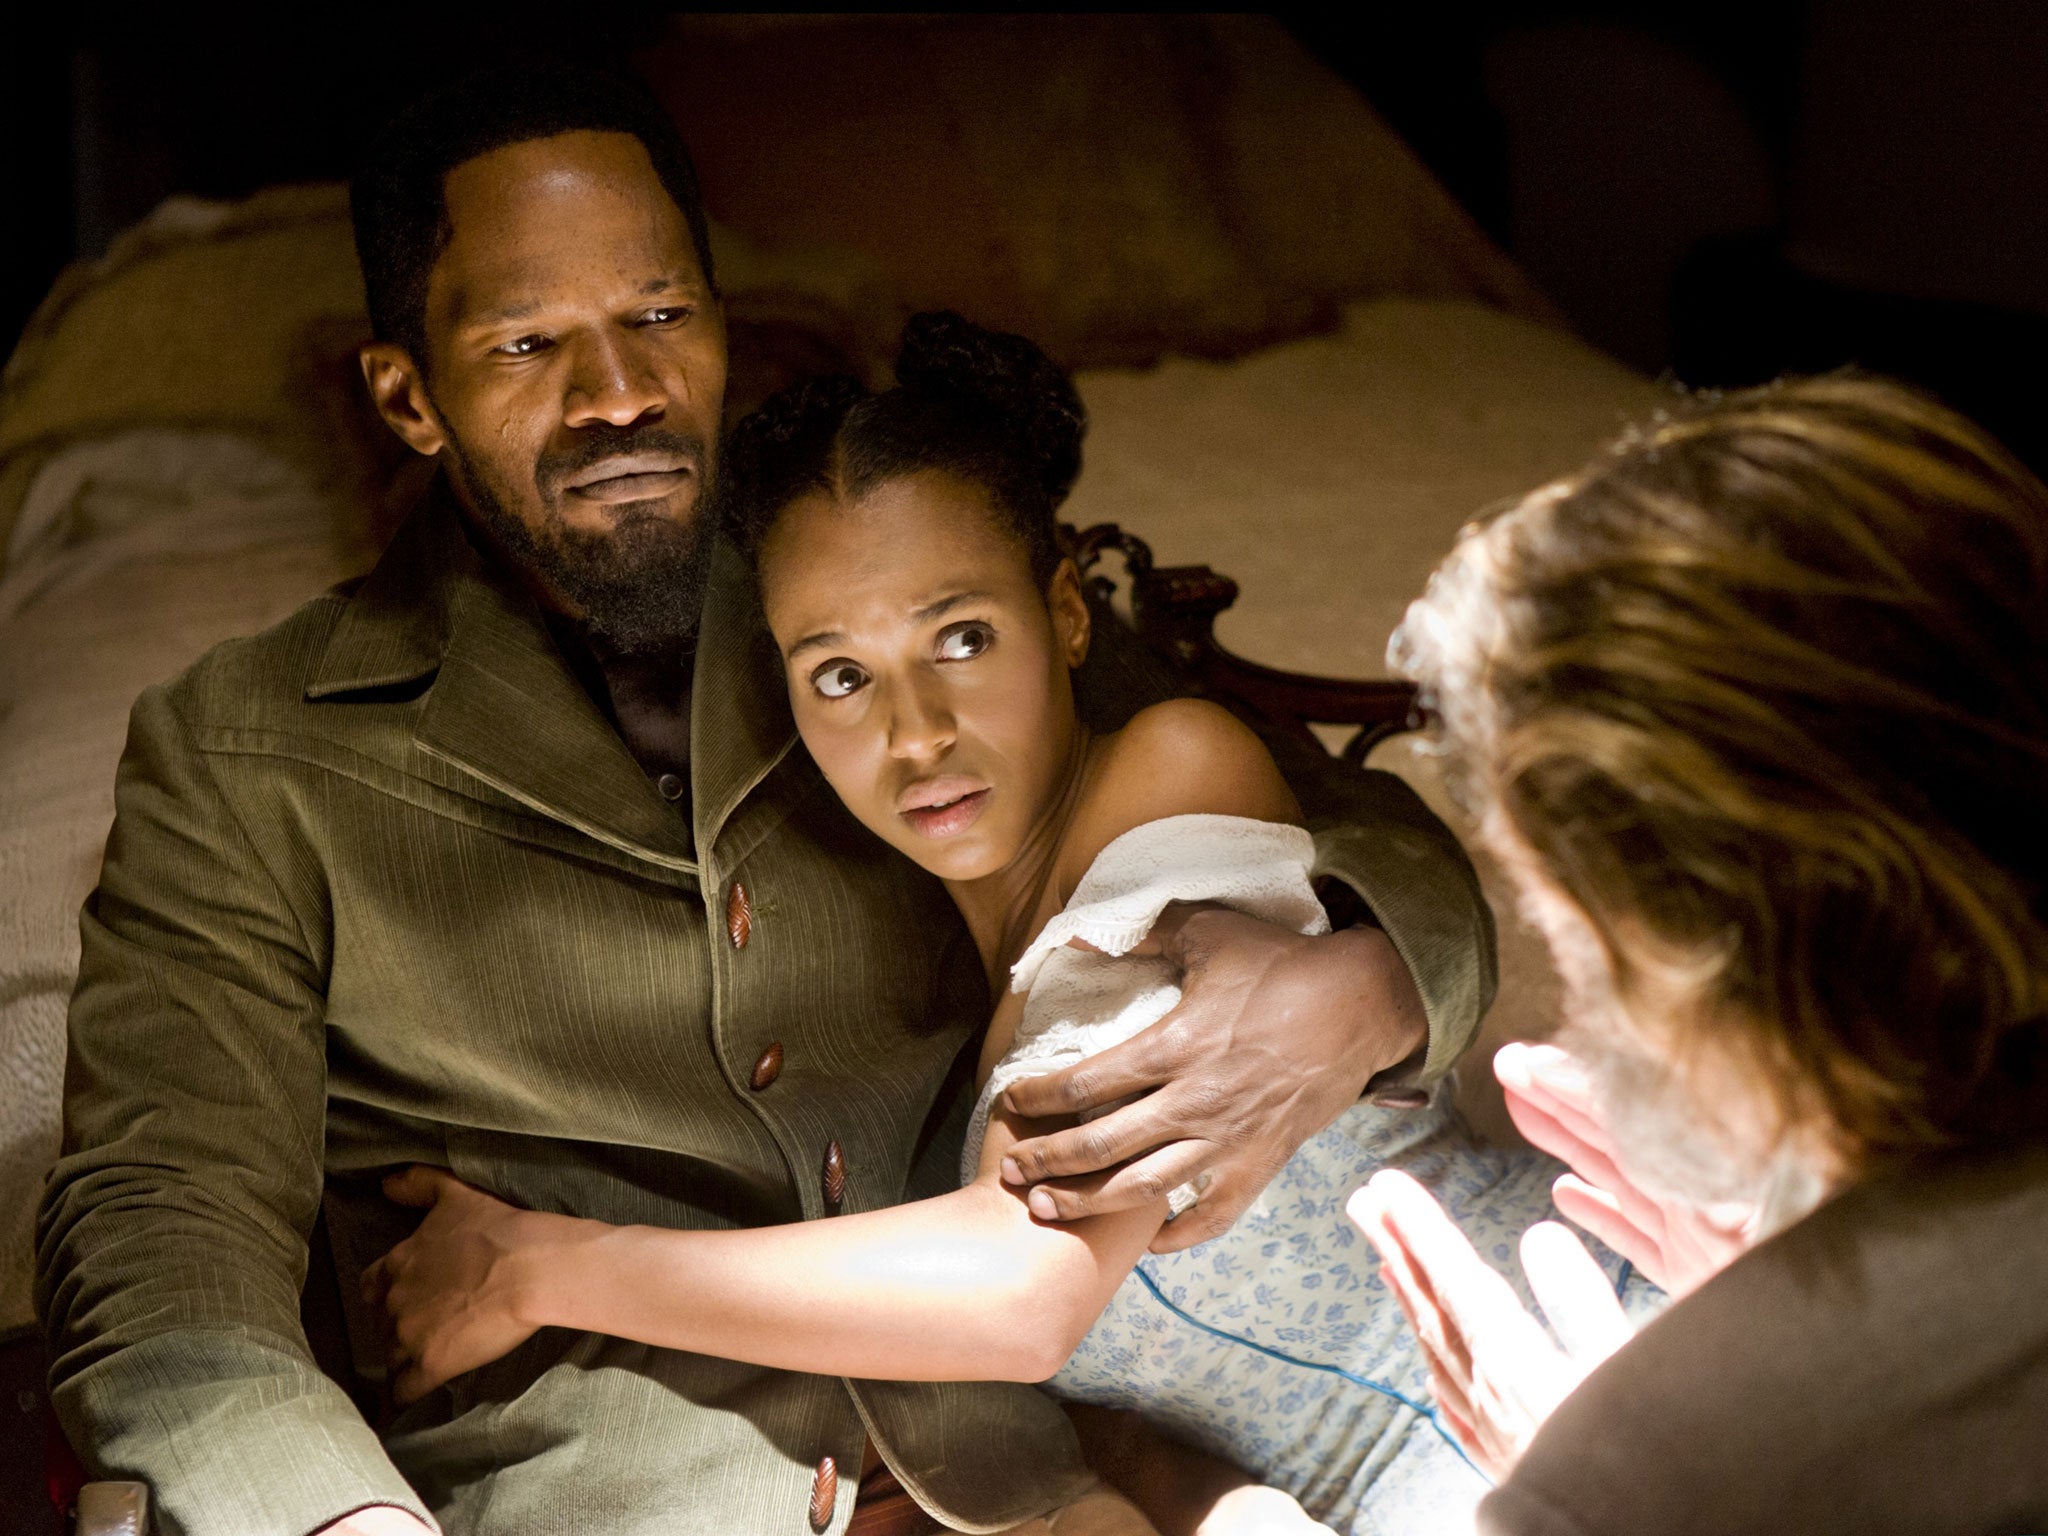 Slaves to passion: Jamie Foxx and Kerry Washington in ‘Django Unchained’